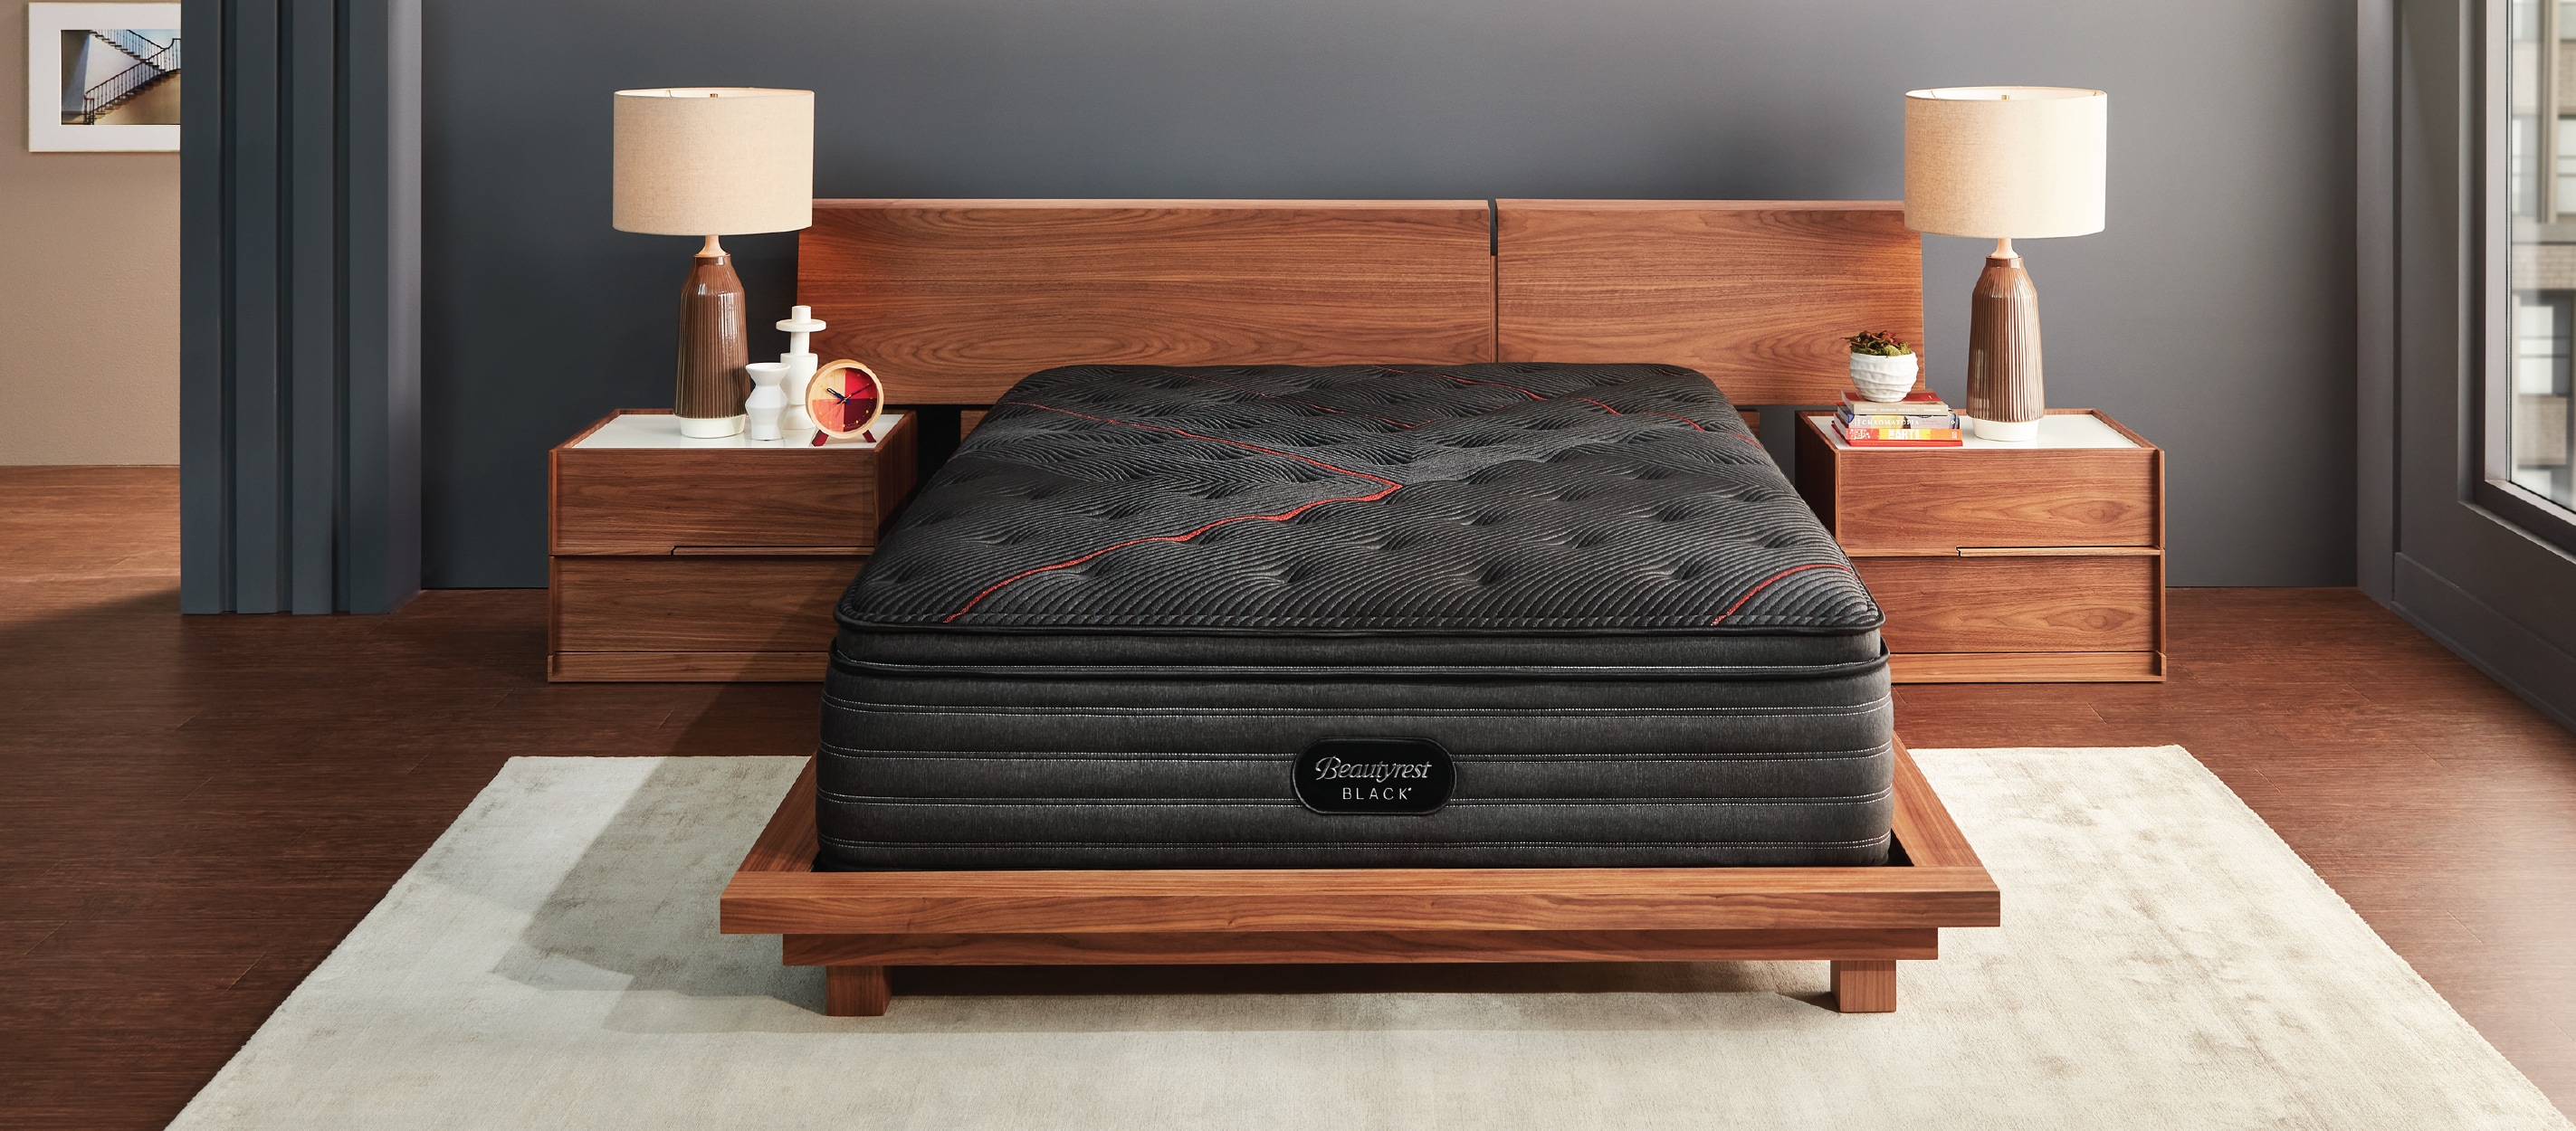 Beautyrest Black Collection